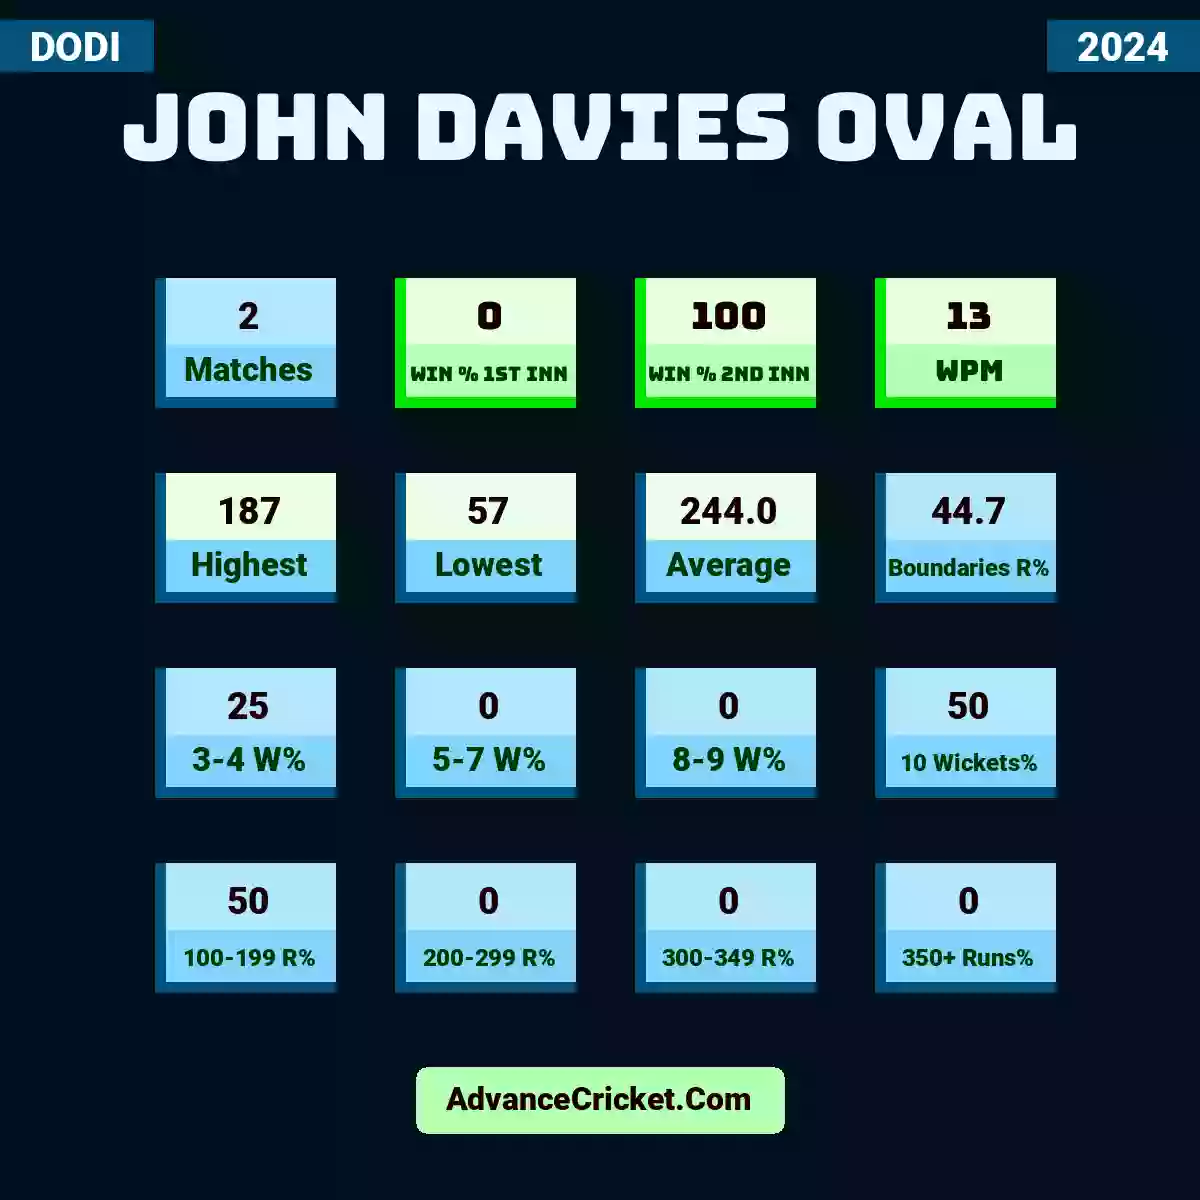 Image showing John Davies Oval with Matches: 2, Win % 1st Inn: 0, Win % 2nd Inn: 100, WPM: 13, Highest: 187, Lowest: 57, Average: 244.0, Boundaries R%: 44.7, 3-4 W%: 25, 5-7 W%: 0, 8-9 W%: 0, 10 Wickets%: 50, 100-199 R%: 50, 200-299 R%: 0, 300-349 R%: 0, 350+ Runs%: 0.